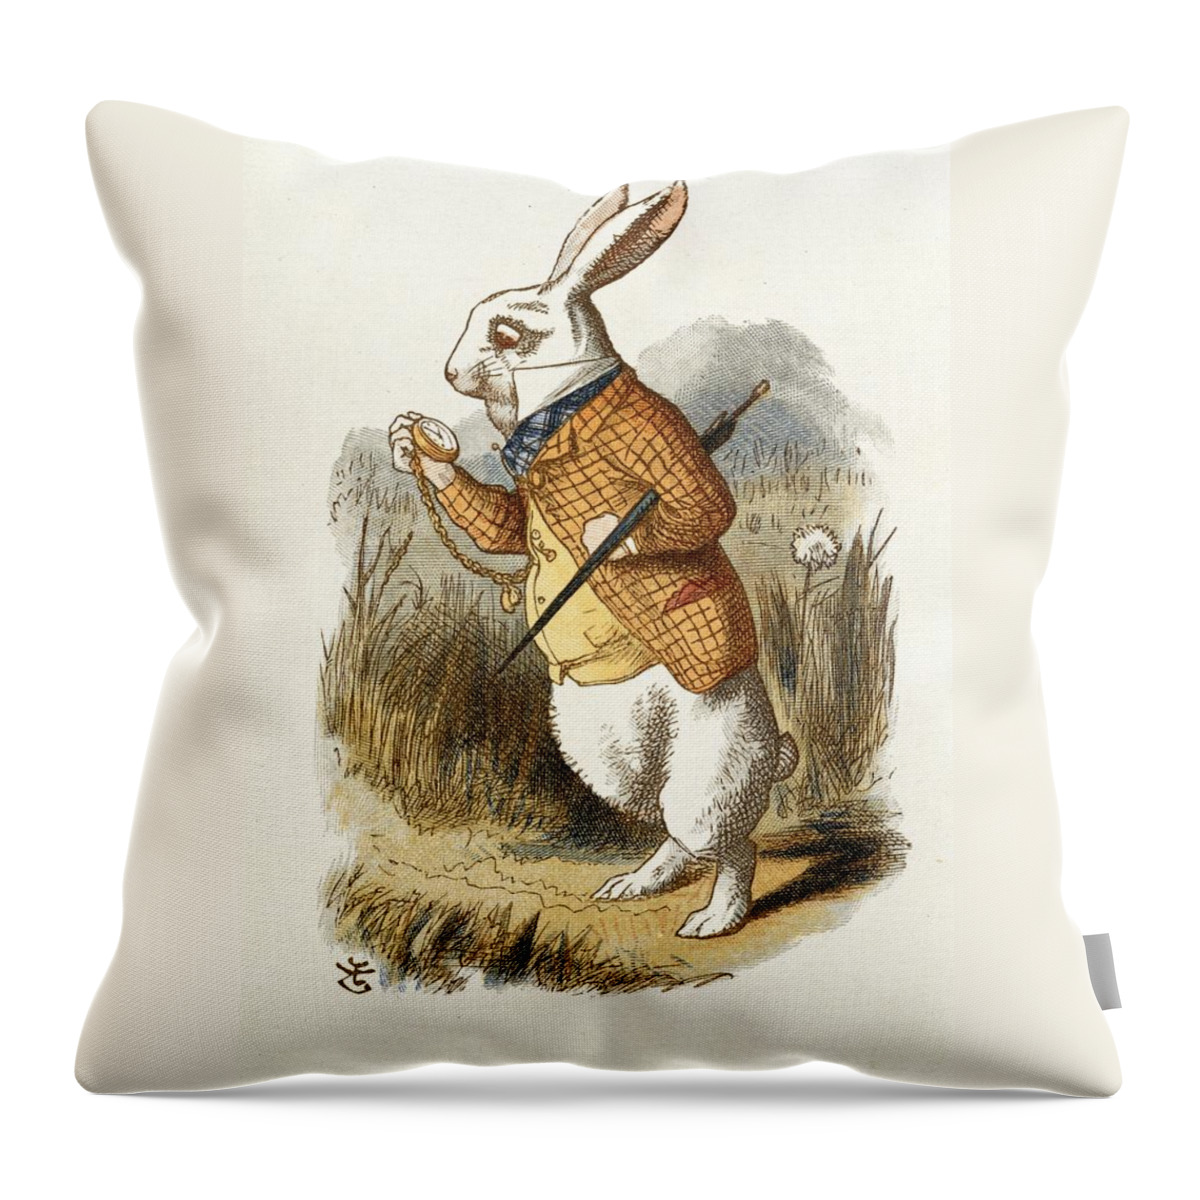 Alice In Wonderland Throw Pillow featuring the painting White Rabbit by John Tenniel